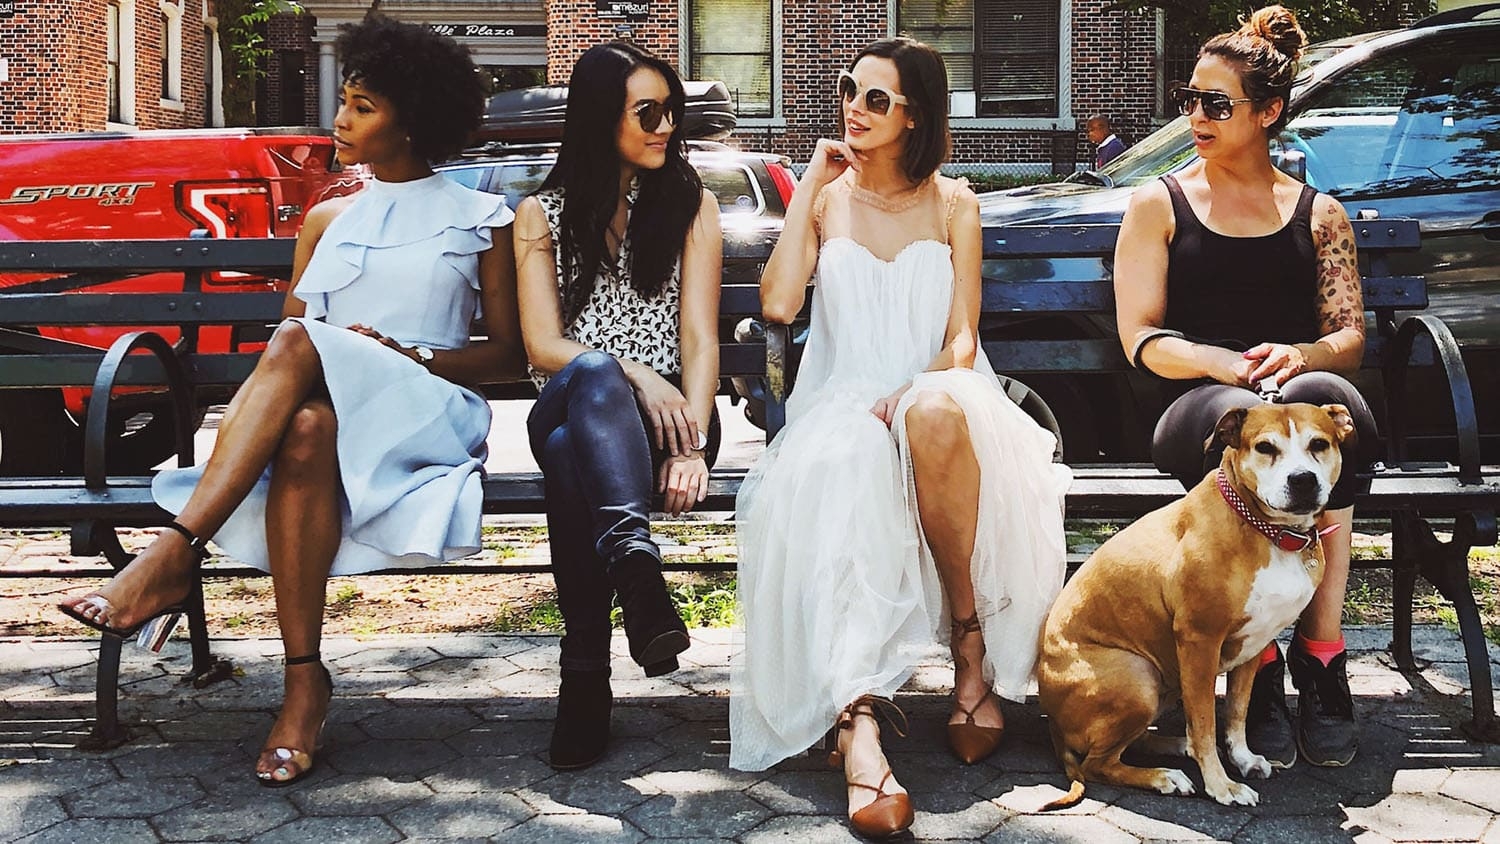 four young women of different races sit on a bench on a busy street.